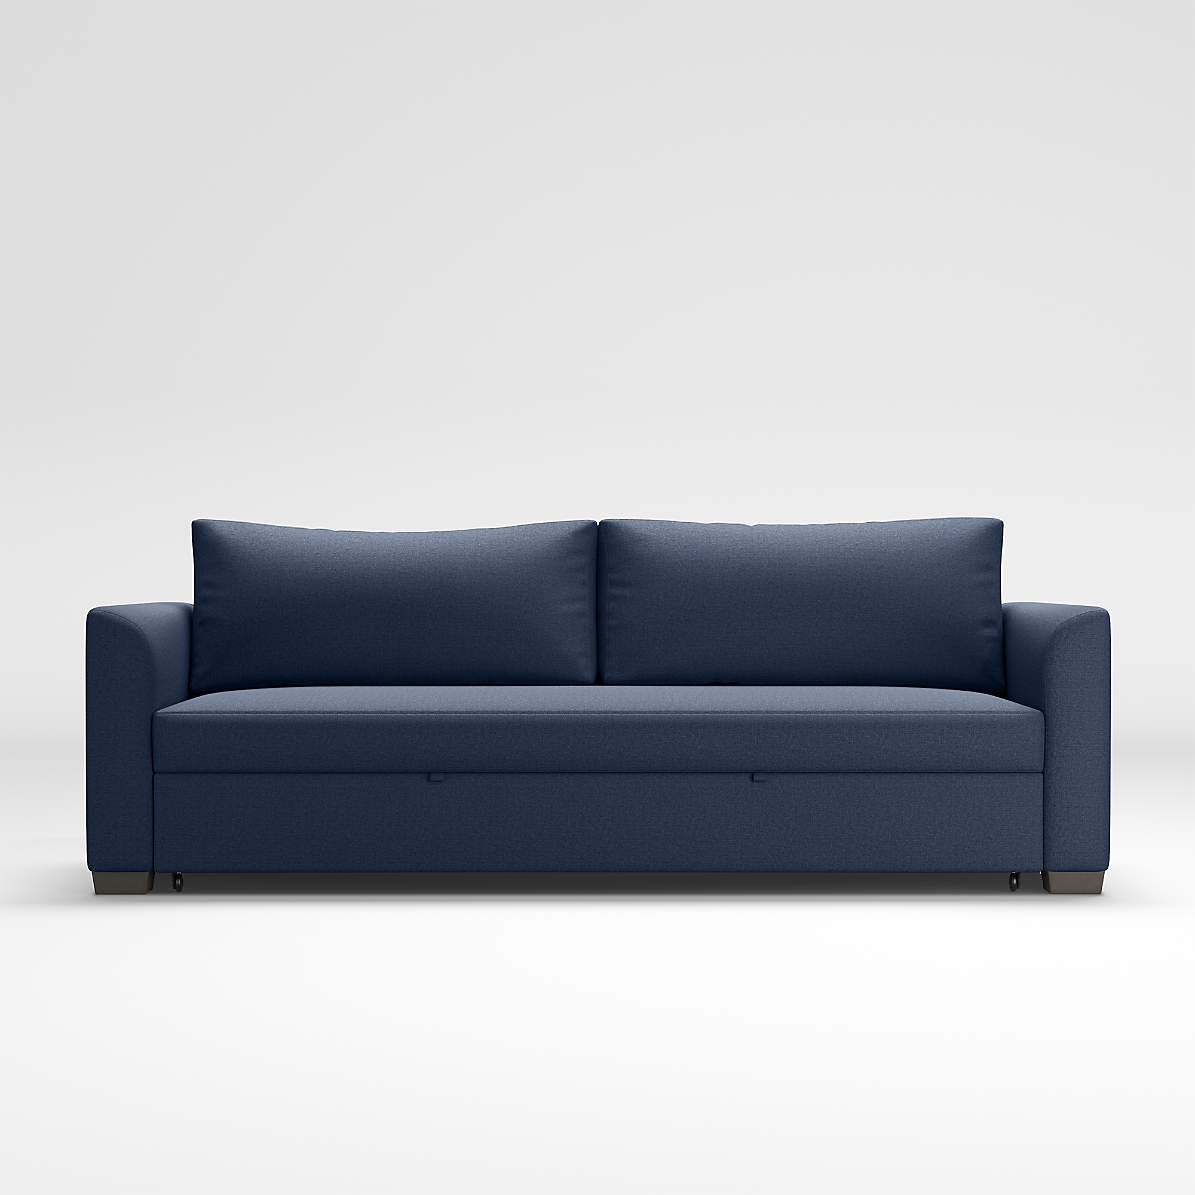 Bedford Queen Trundle Sleeper Sofa, Sofa With Trundle Sleeper